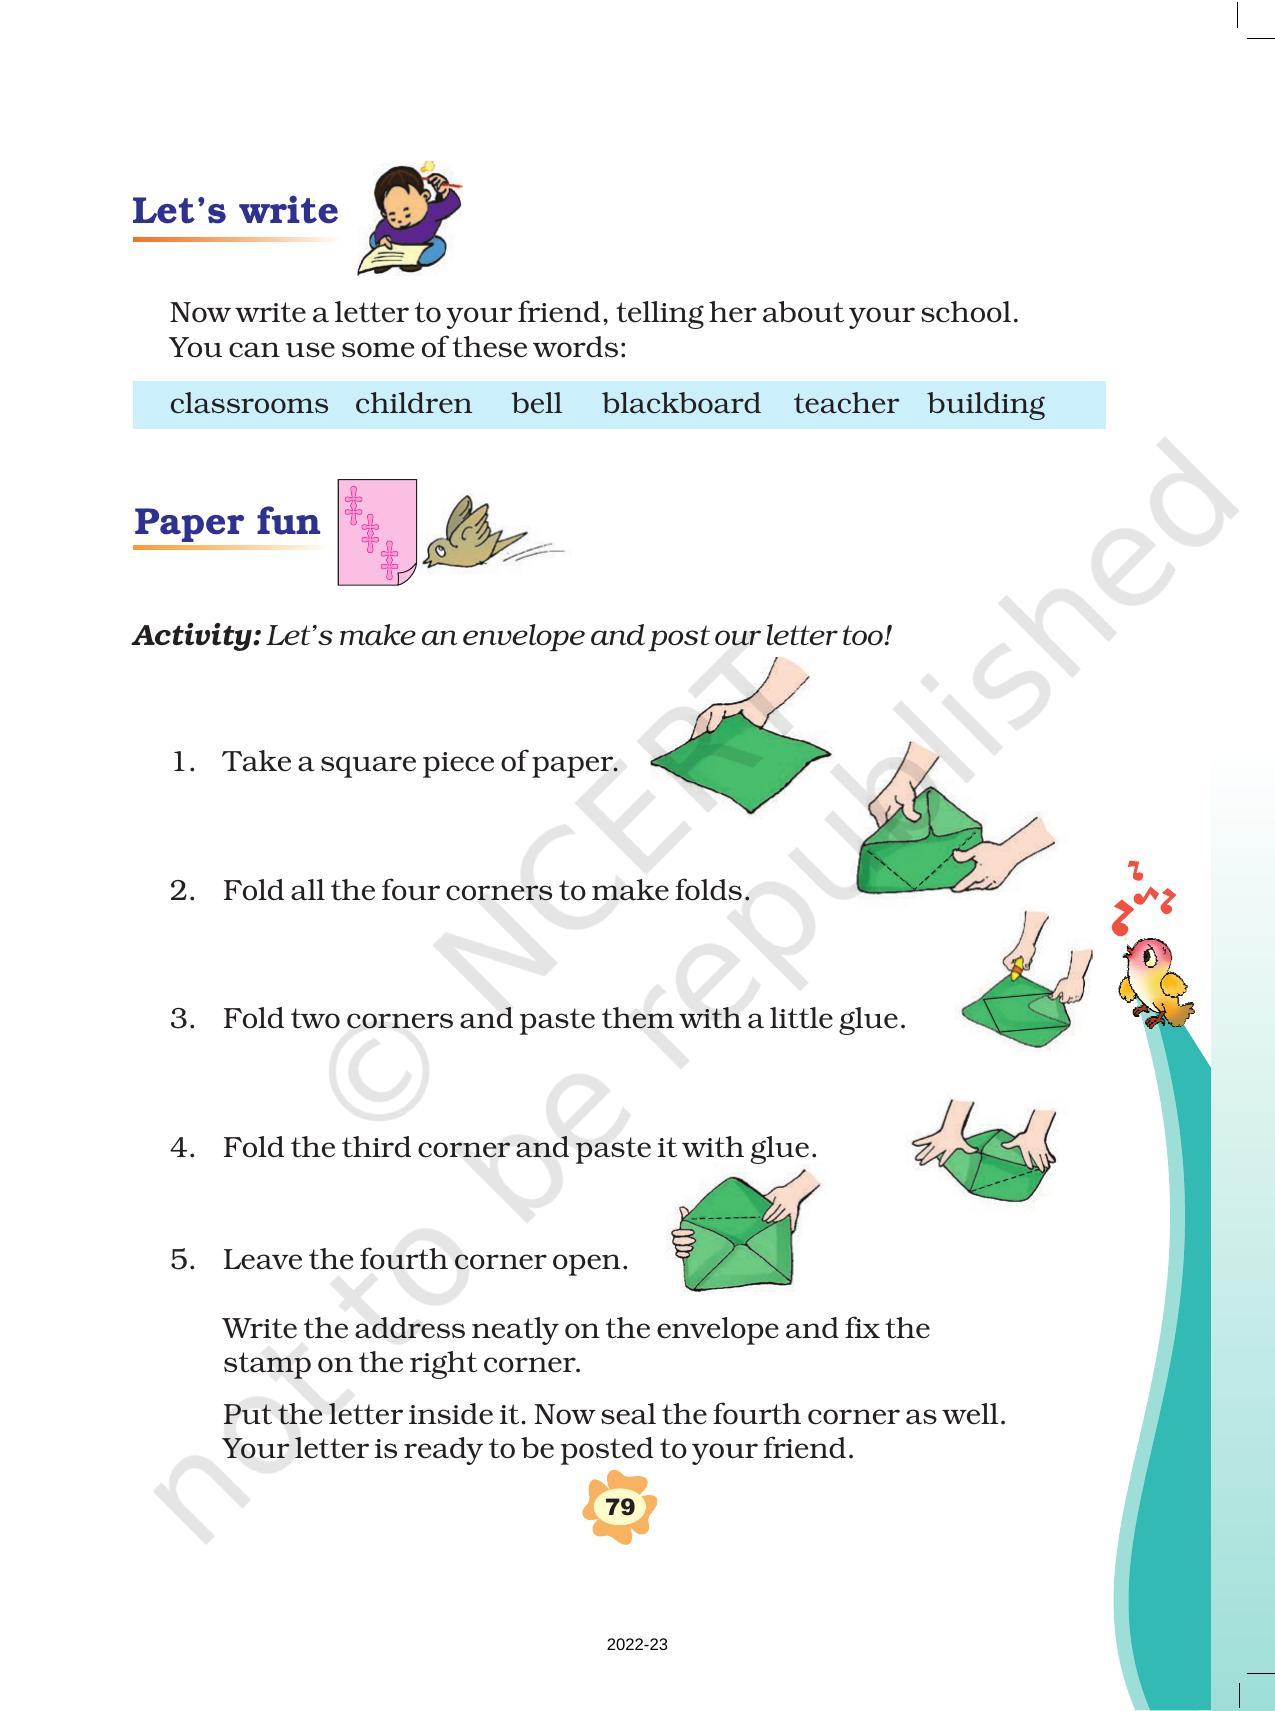 NCERT Book for Class 3 English: Unit VIII.1-What’s in the Mailbox? - Page 3